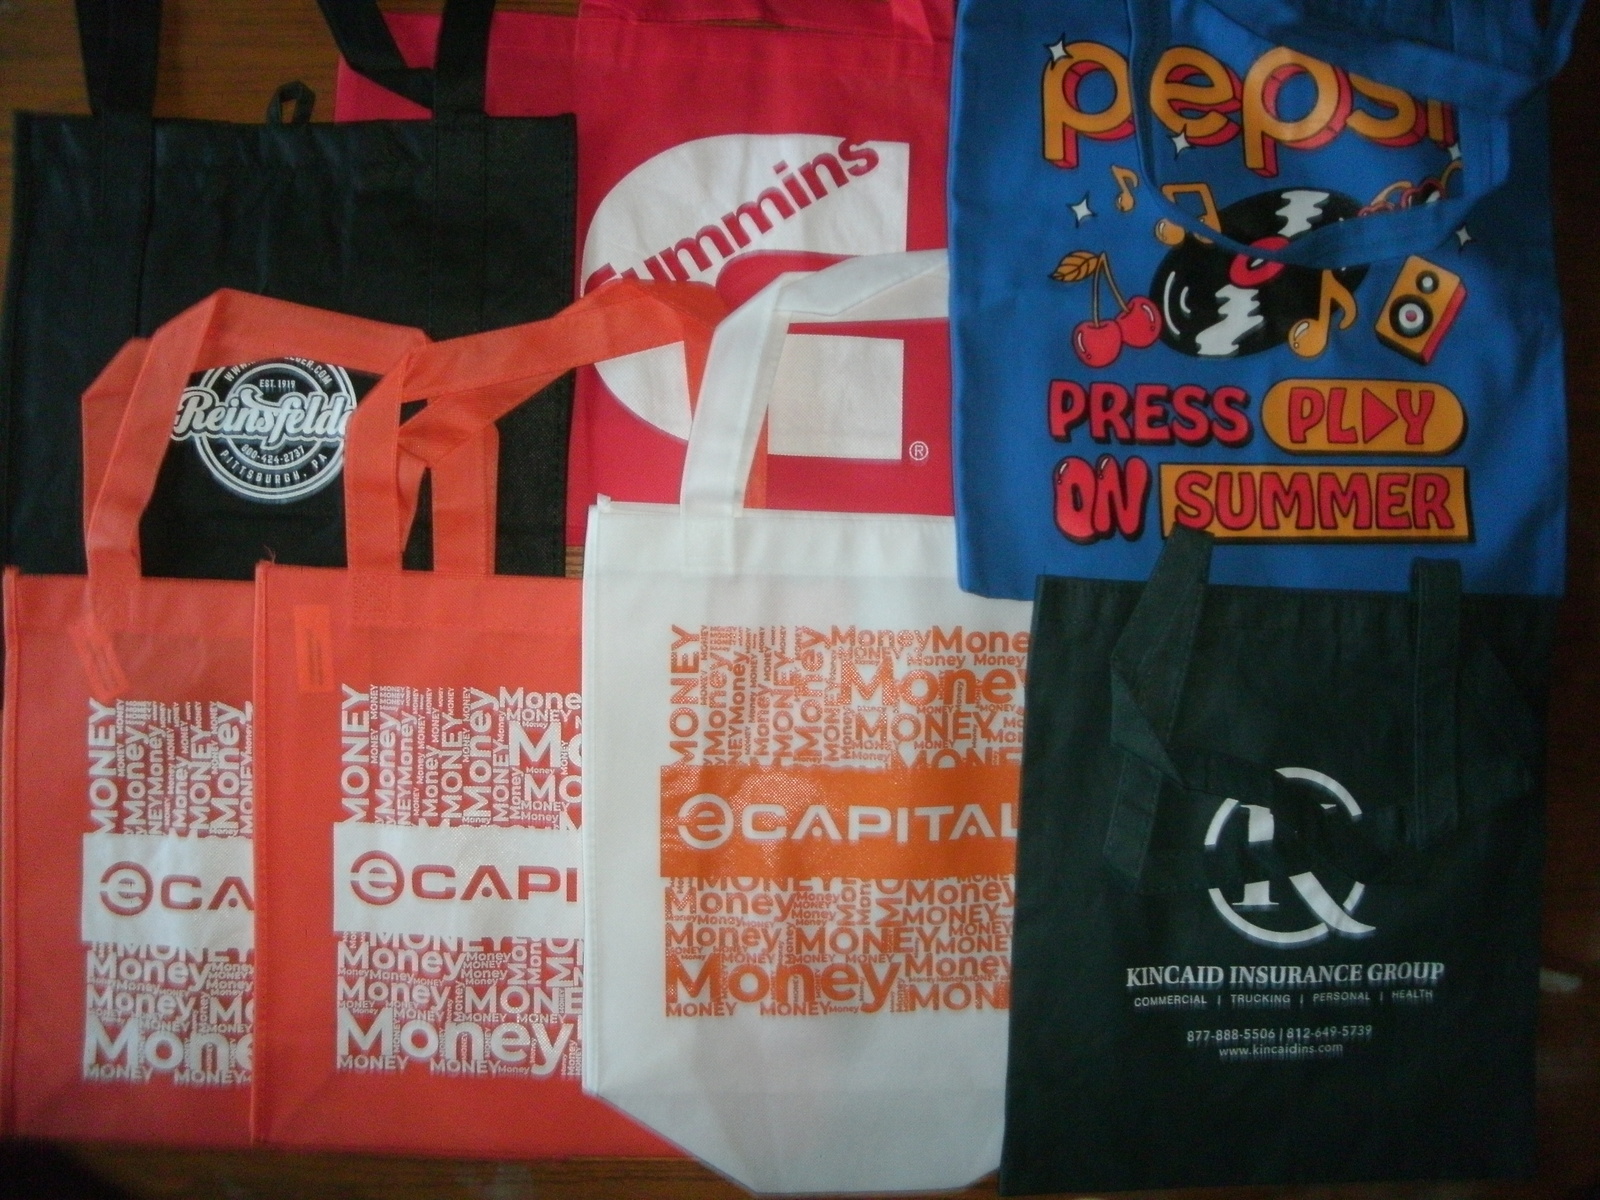 Lot of 6 new reusable fabric totes double handle shopping market bags w/ logos - $11.95